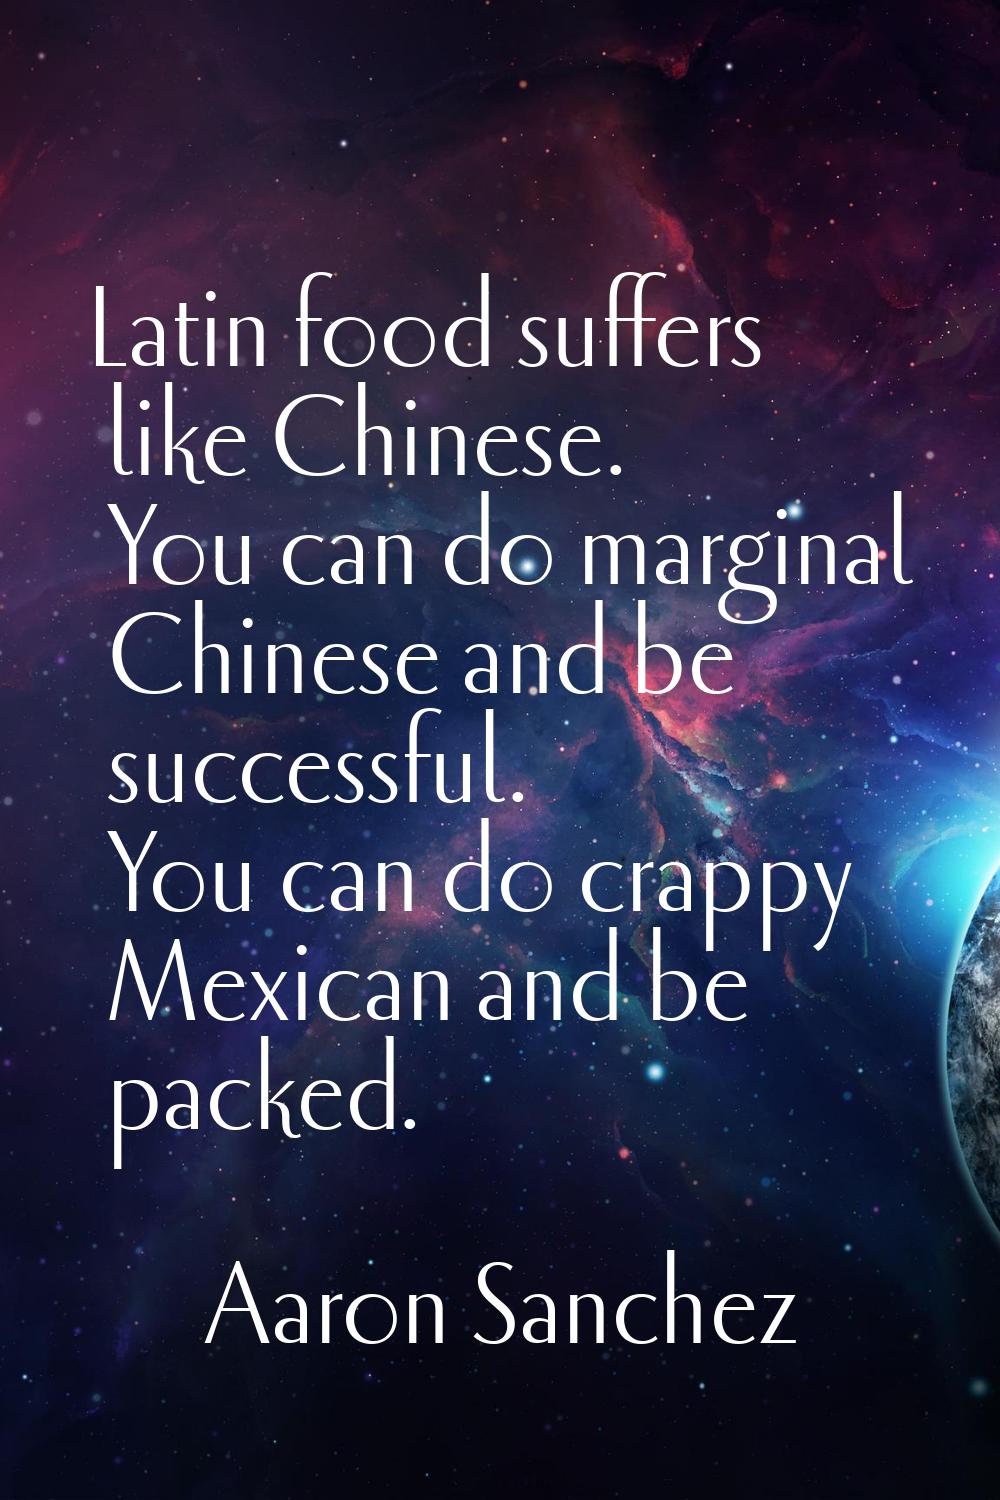 Latin food suffers like Chinese. You can do marginal Chinese and be successful. You can do crappy M